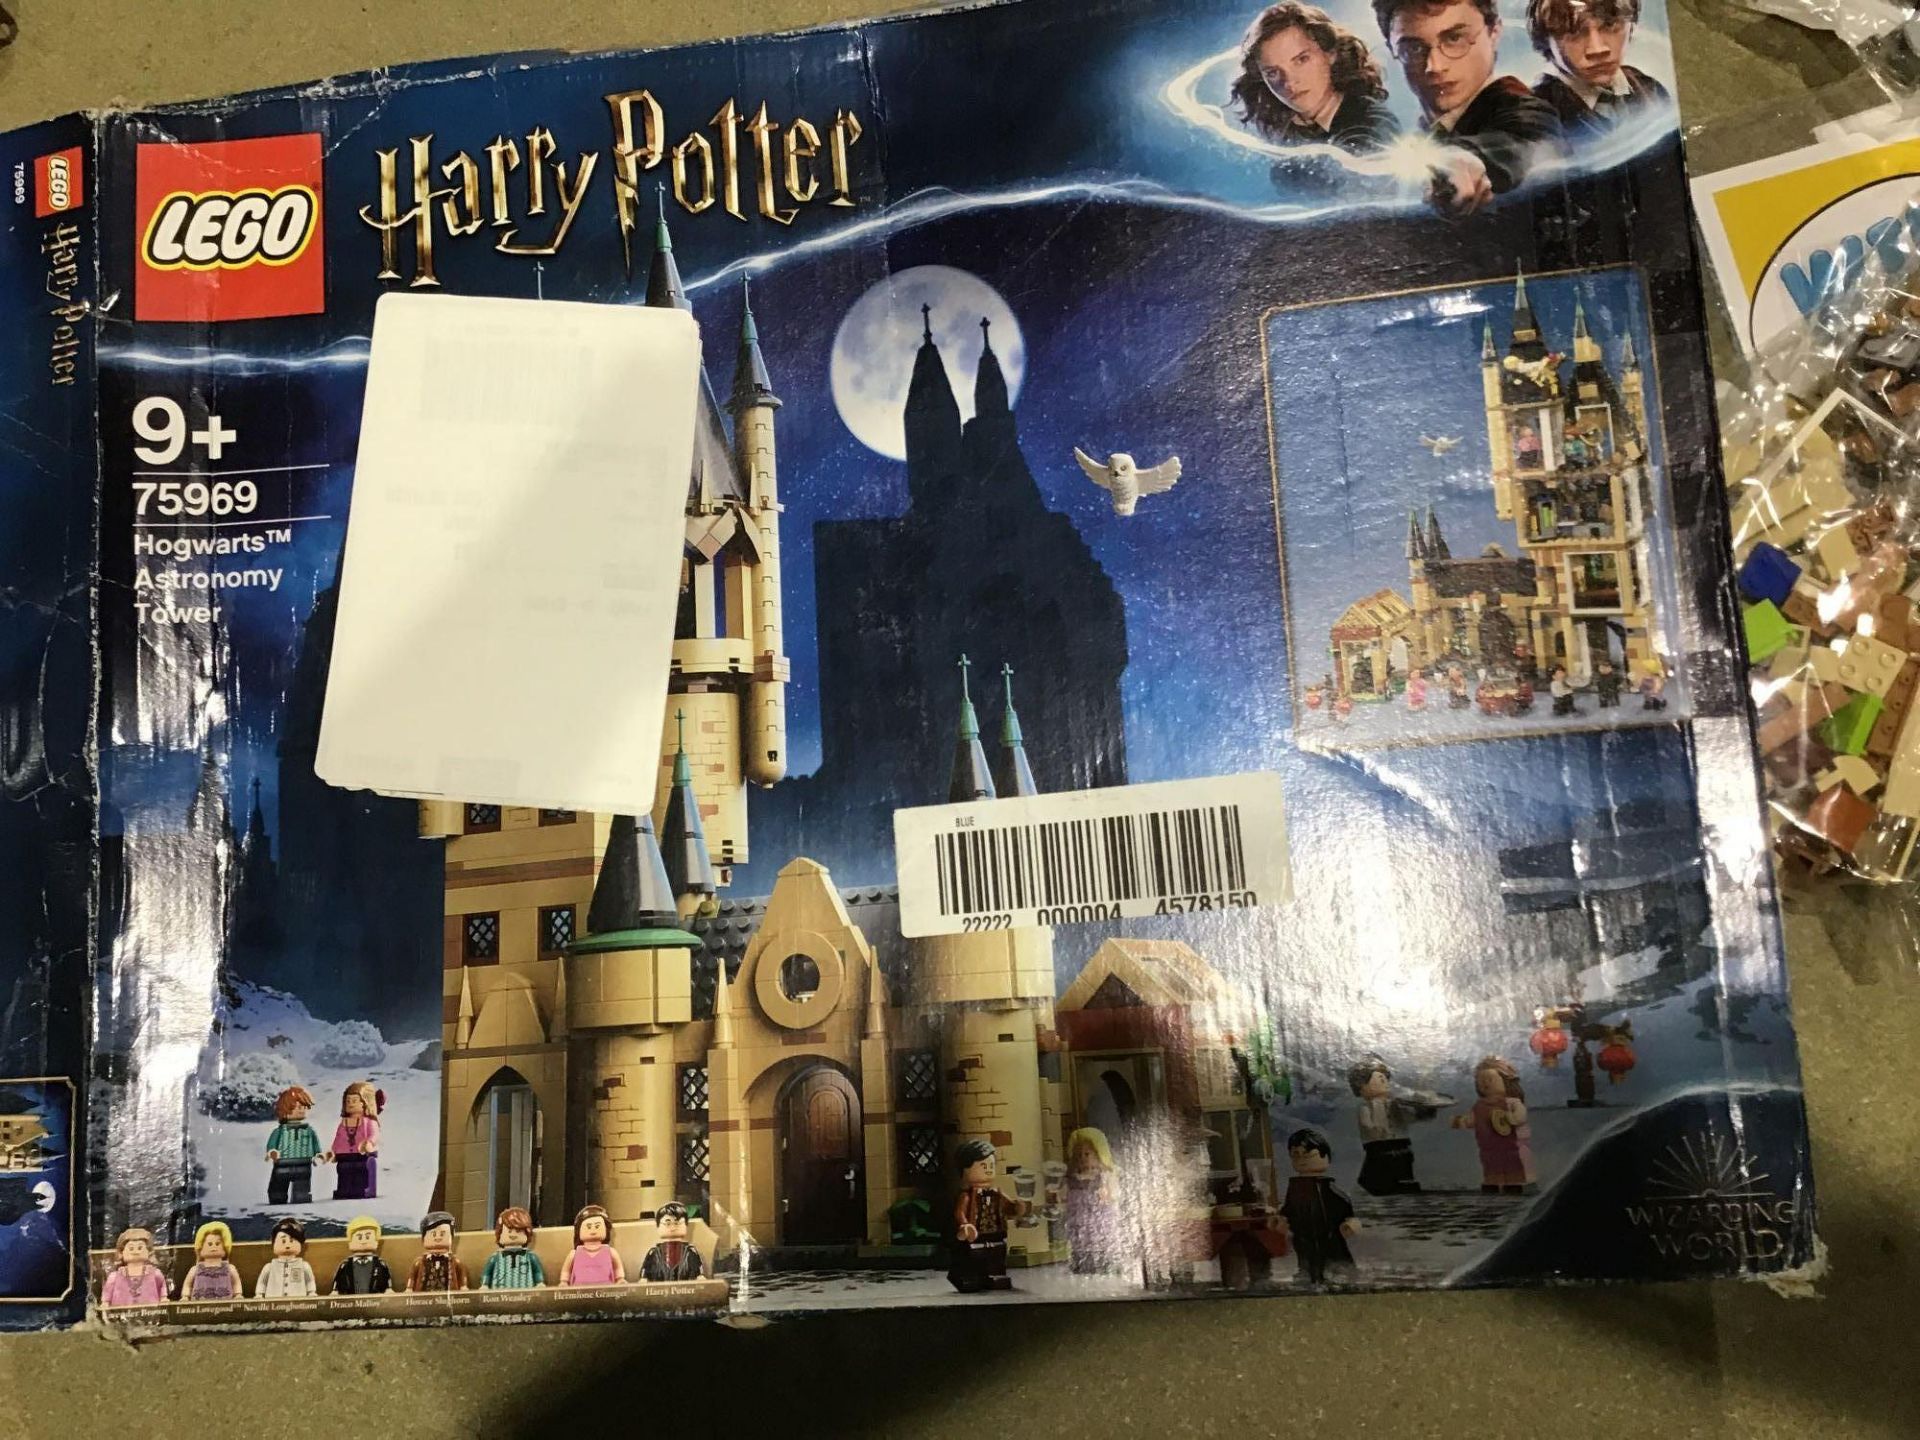 Lego 75969 Harry Potter Hogwarts Castle Astronomy Tower Toy Compatible with Great Hall and Whomping - Image 2 of 4